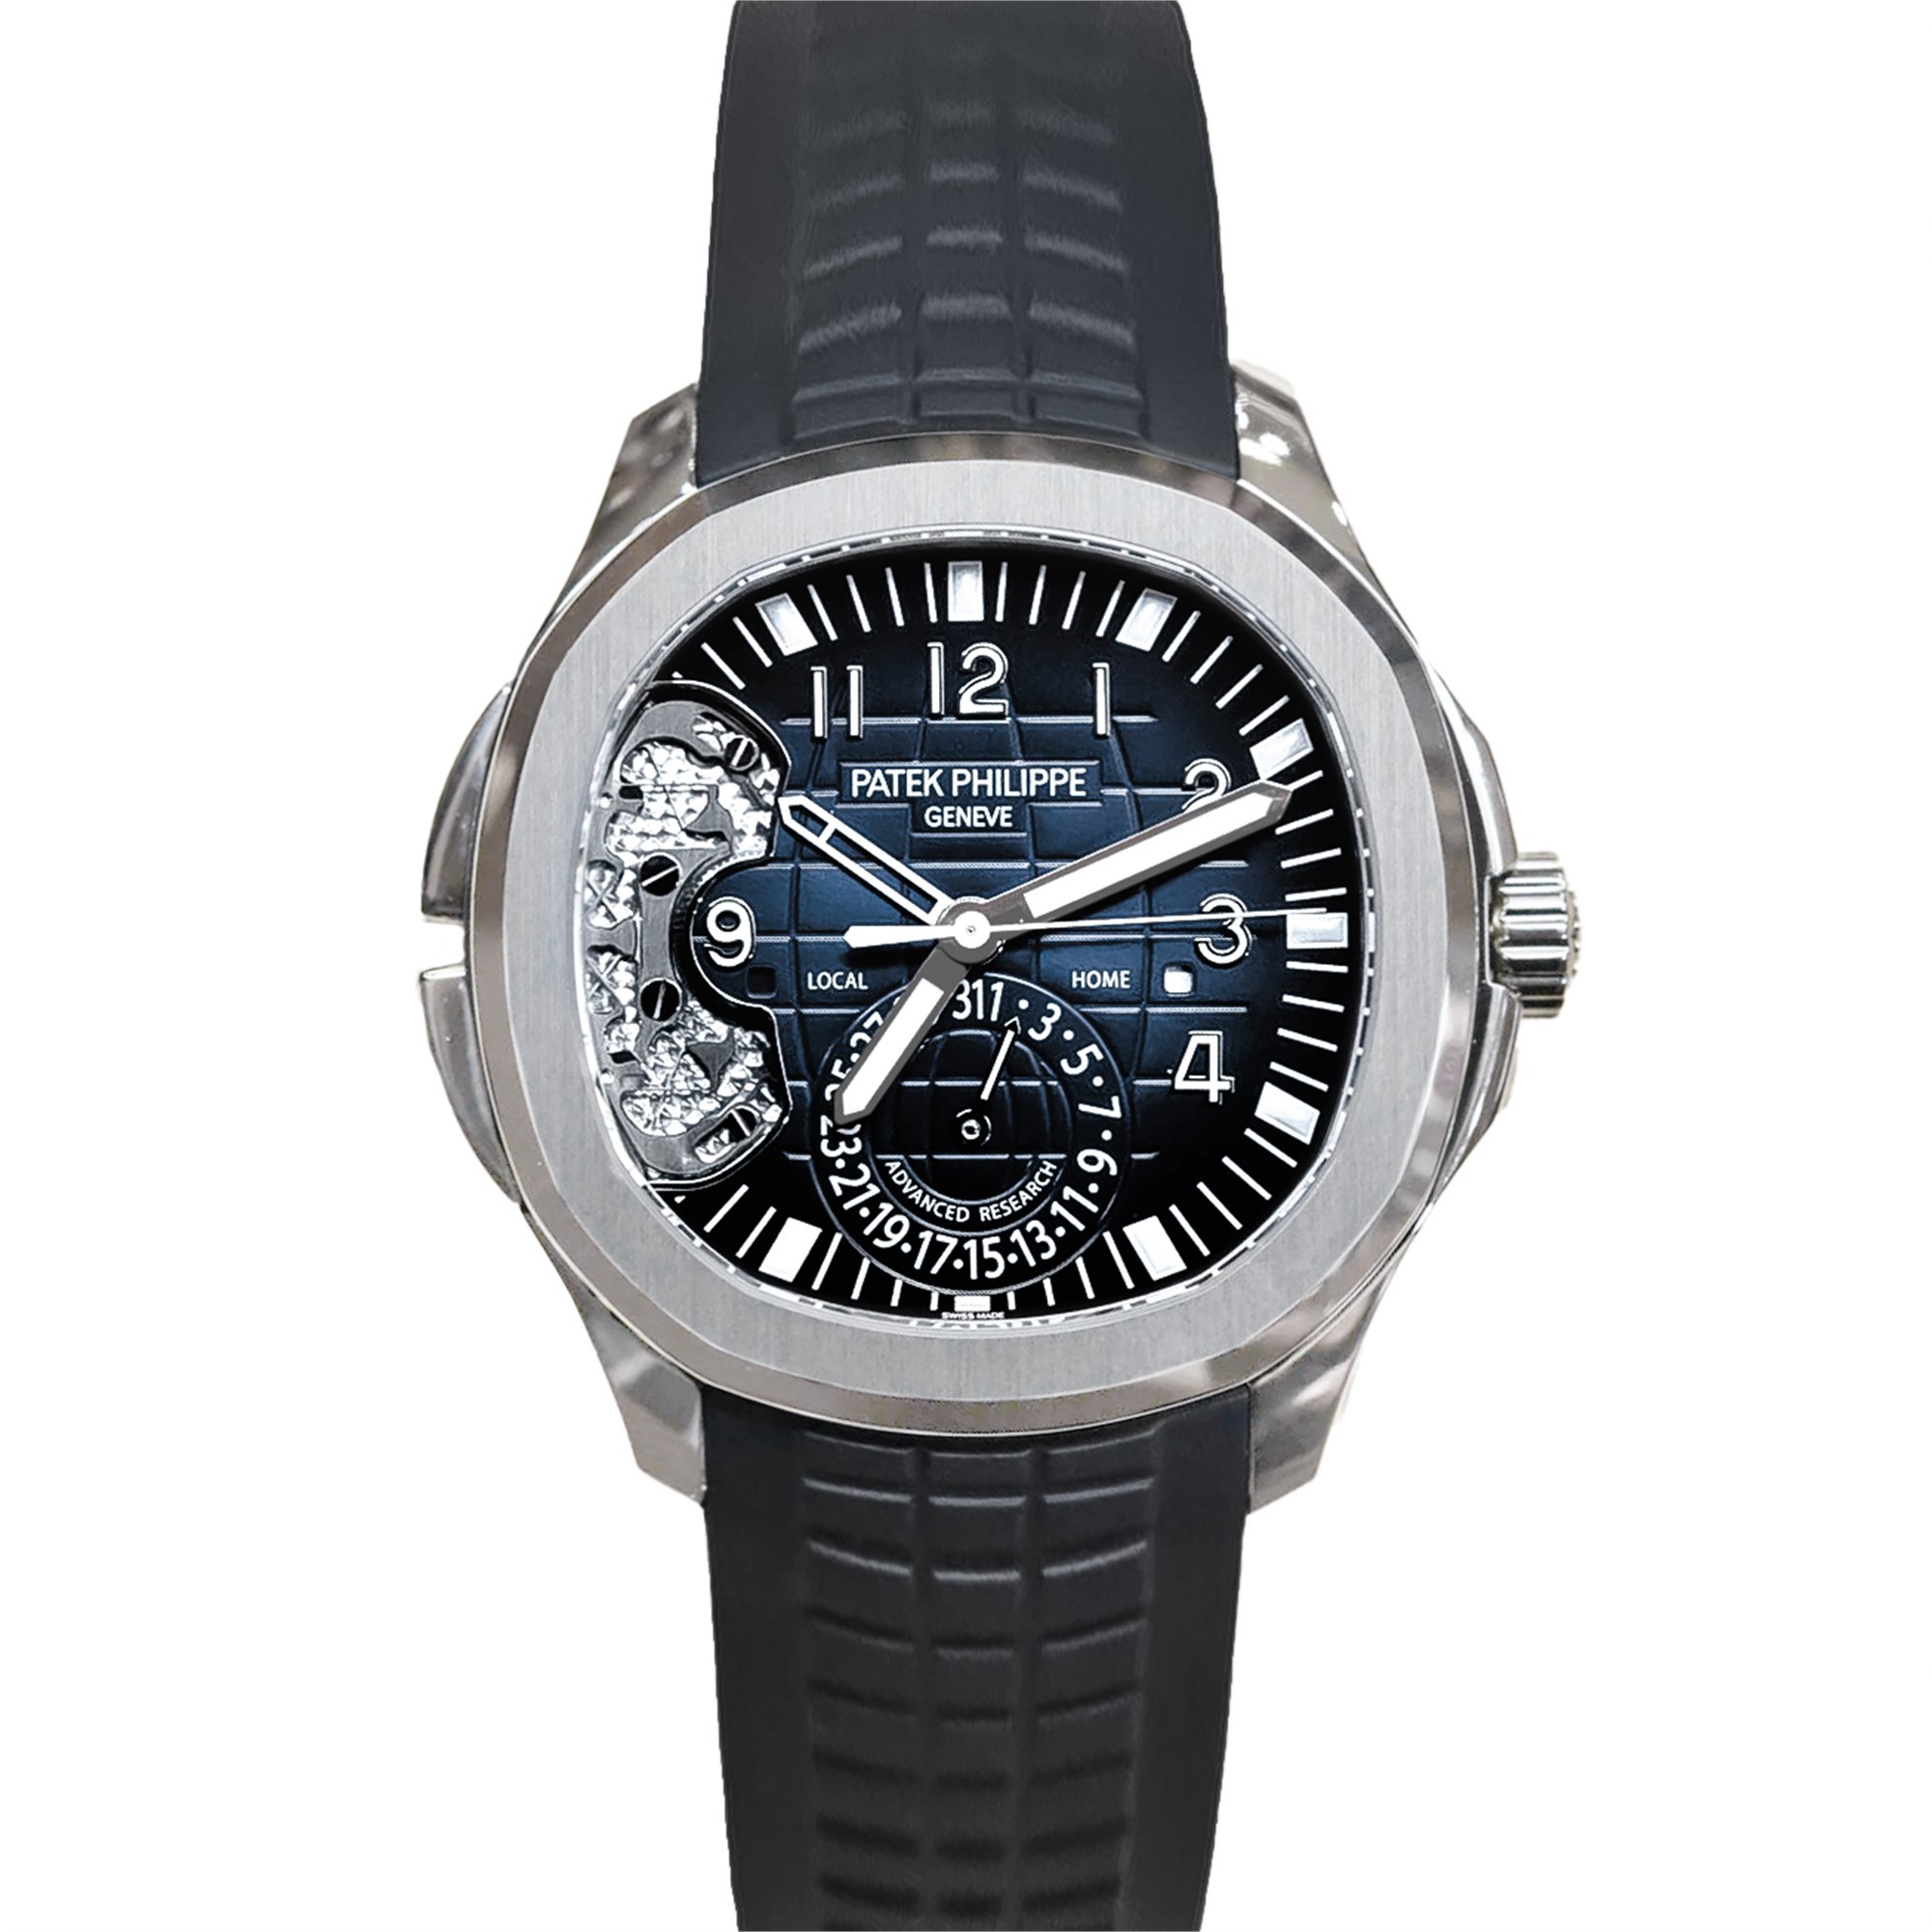 Patek Philippe Aquanaut Advanced Research Limited Edition 500 Pieces 18K White Gold 5650G-001